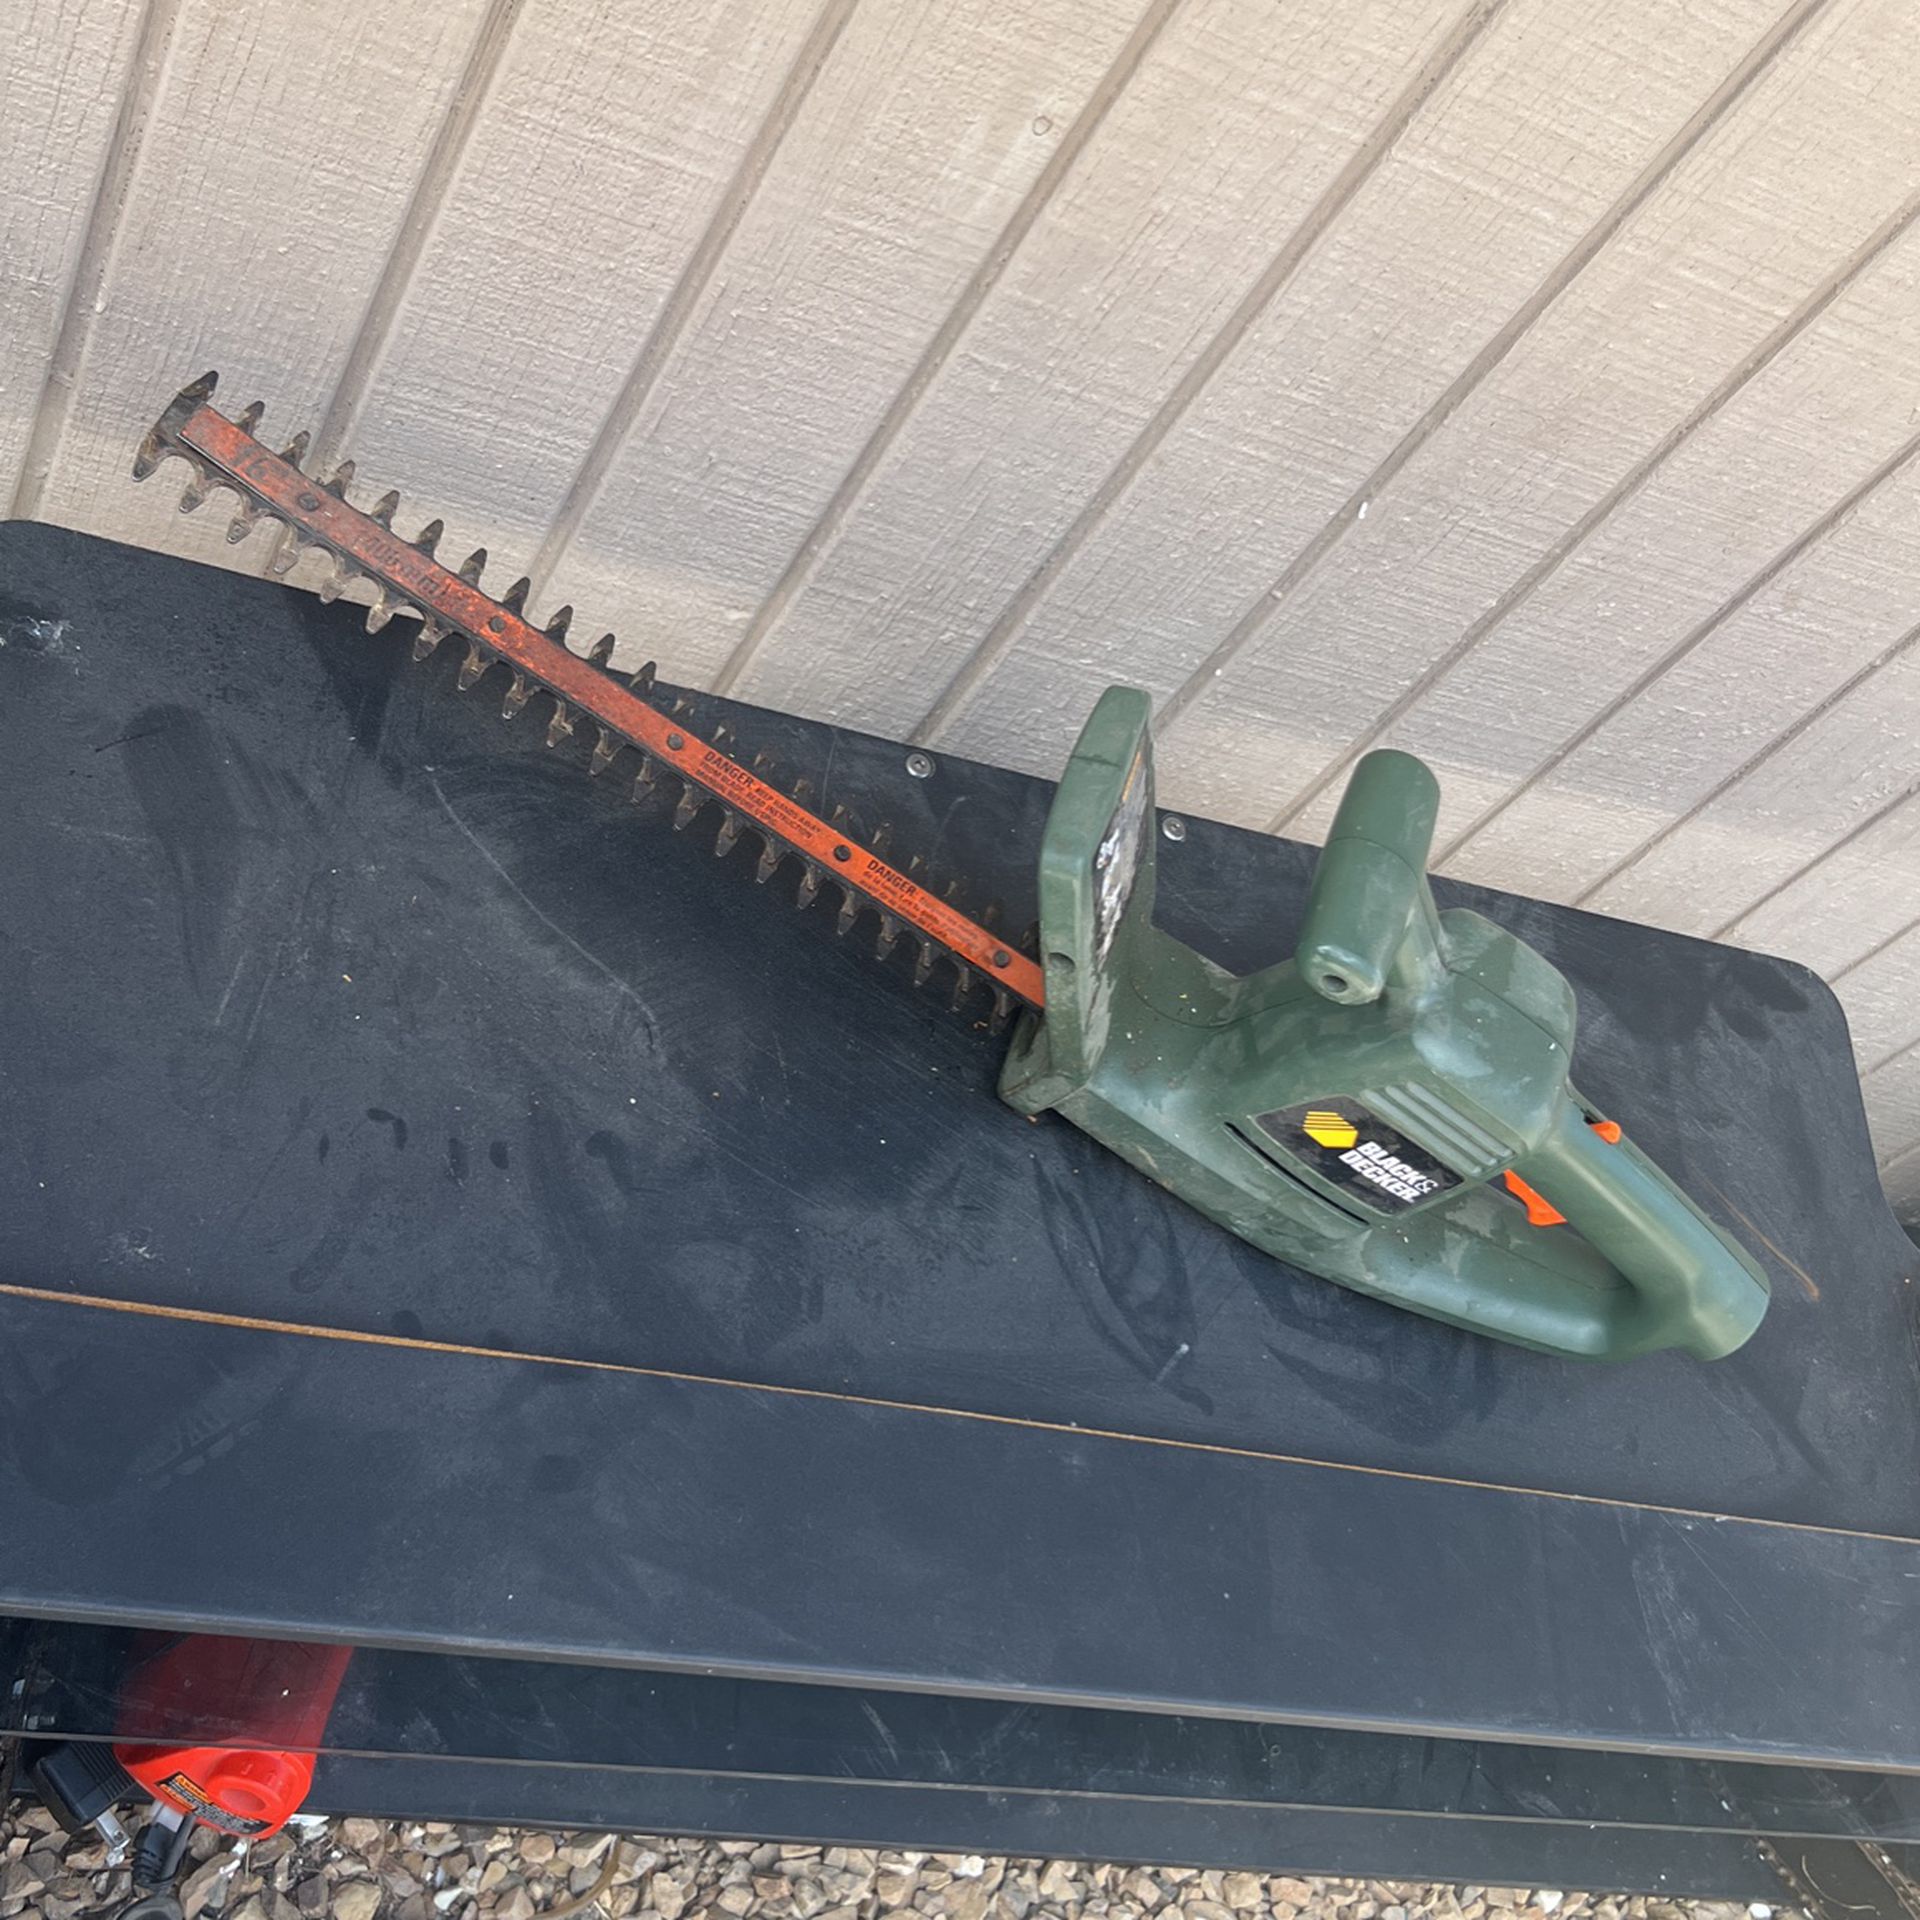 Black And Decker Electric Green Trimmer 16” Outdoor Clean Maintenance Tool Work Home Garden Matas Arbol Orange Electric for Sale in North Las Vegas, NV - OfferUp